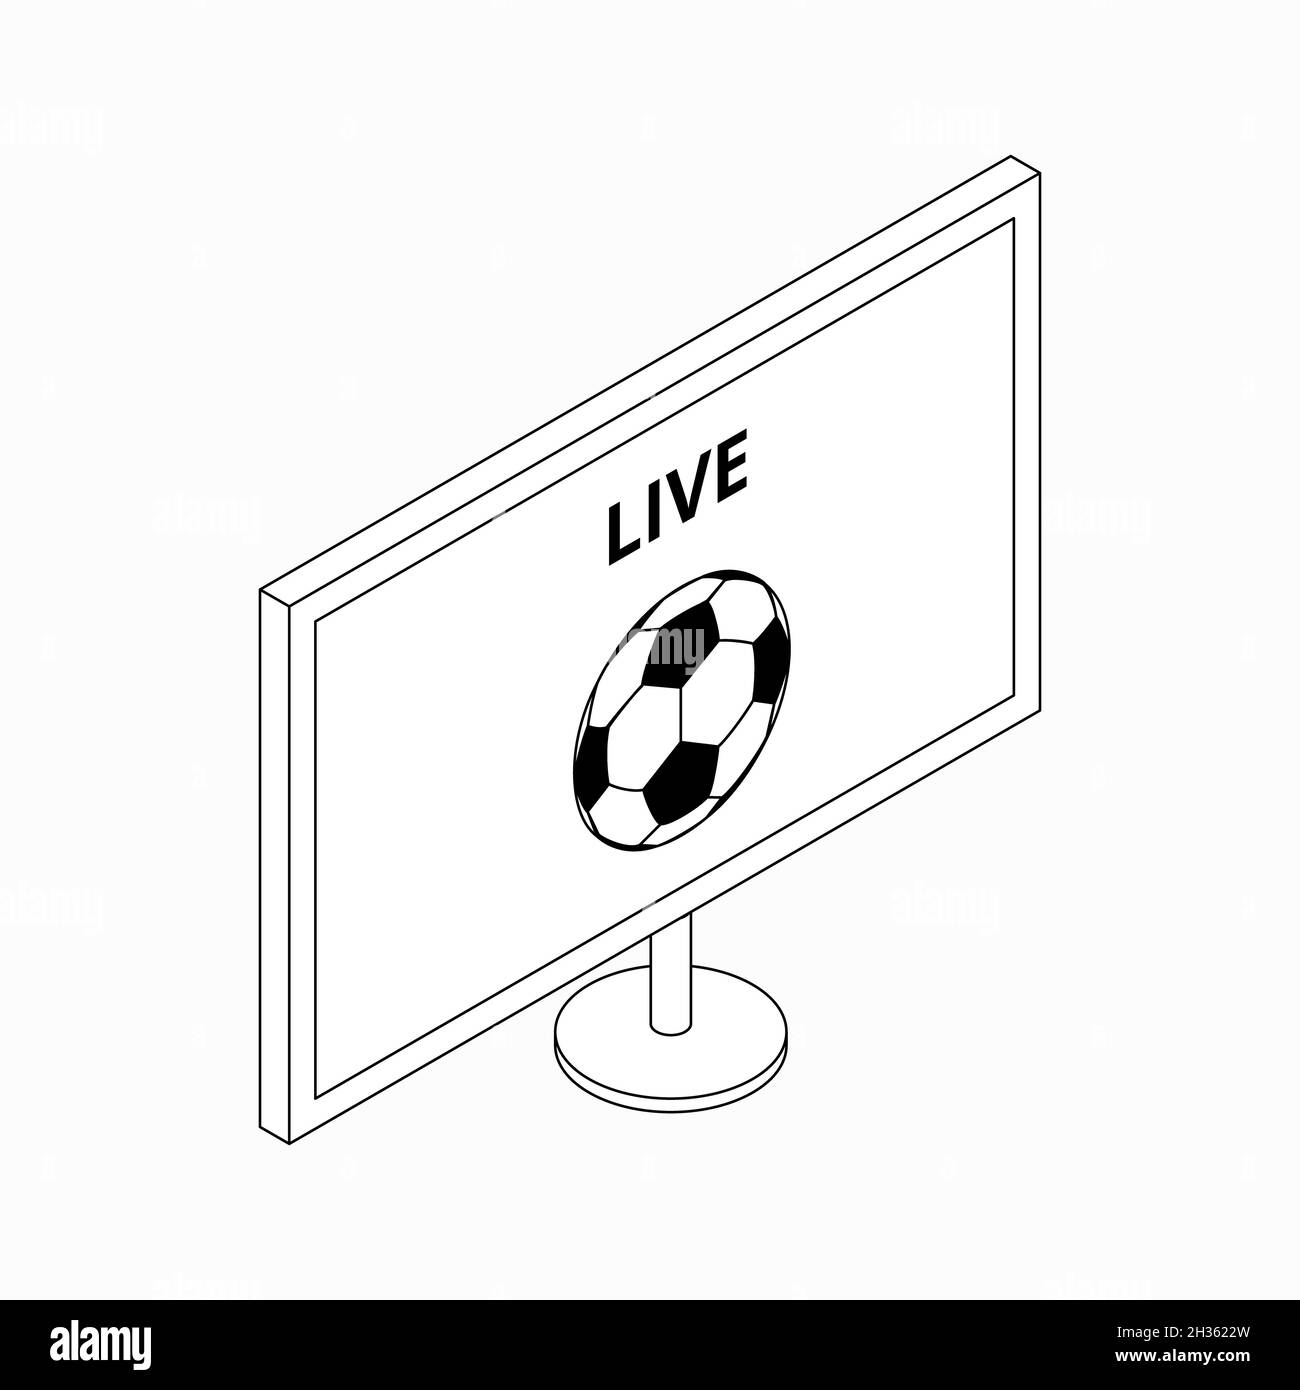 Football match on TV live stream icon in isometric 3d style on a white background Stock Photo